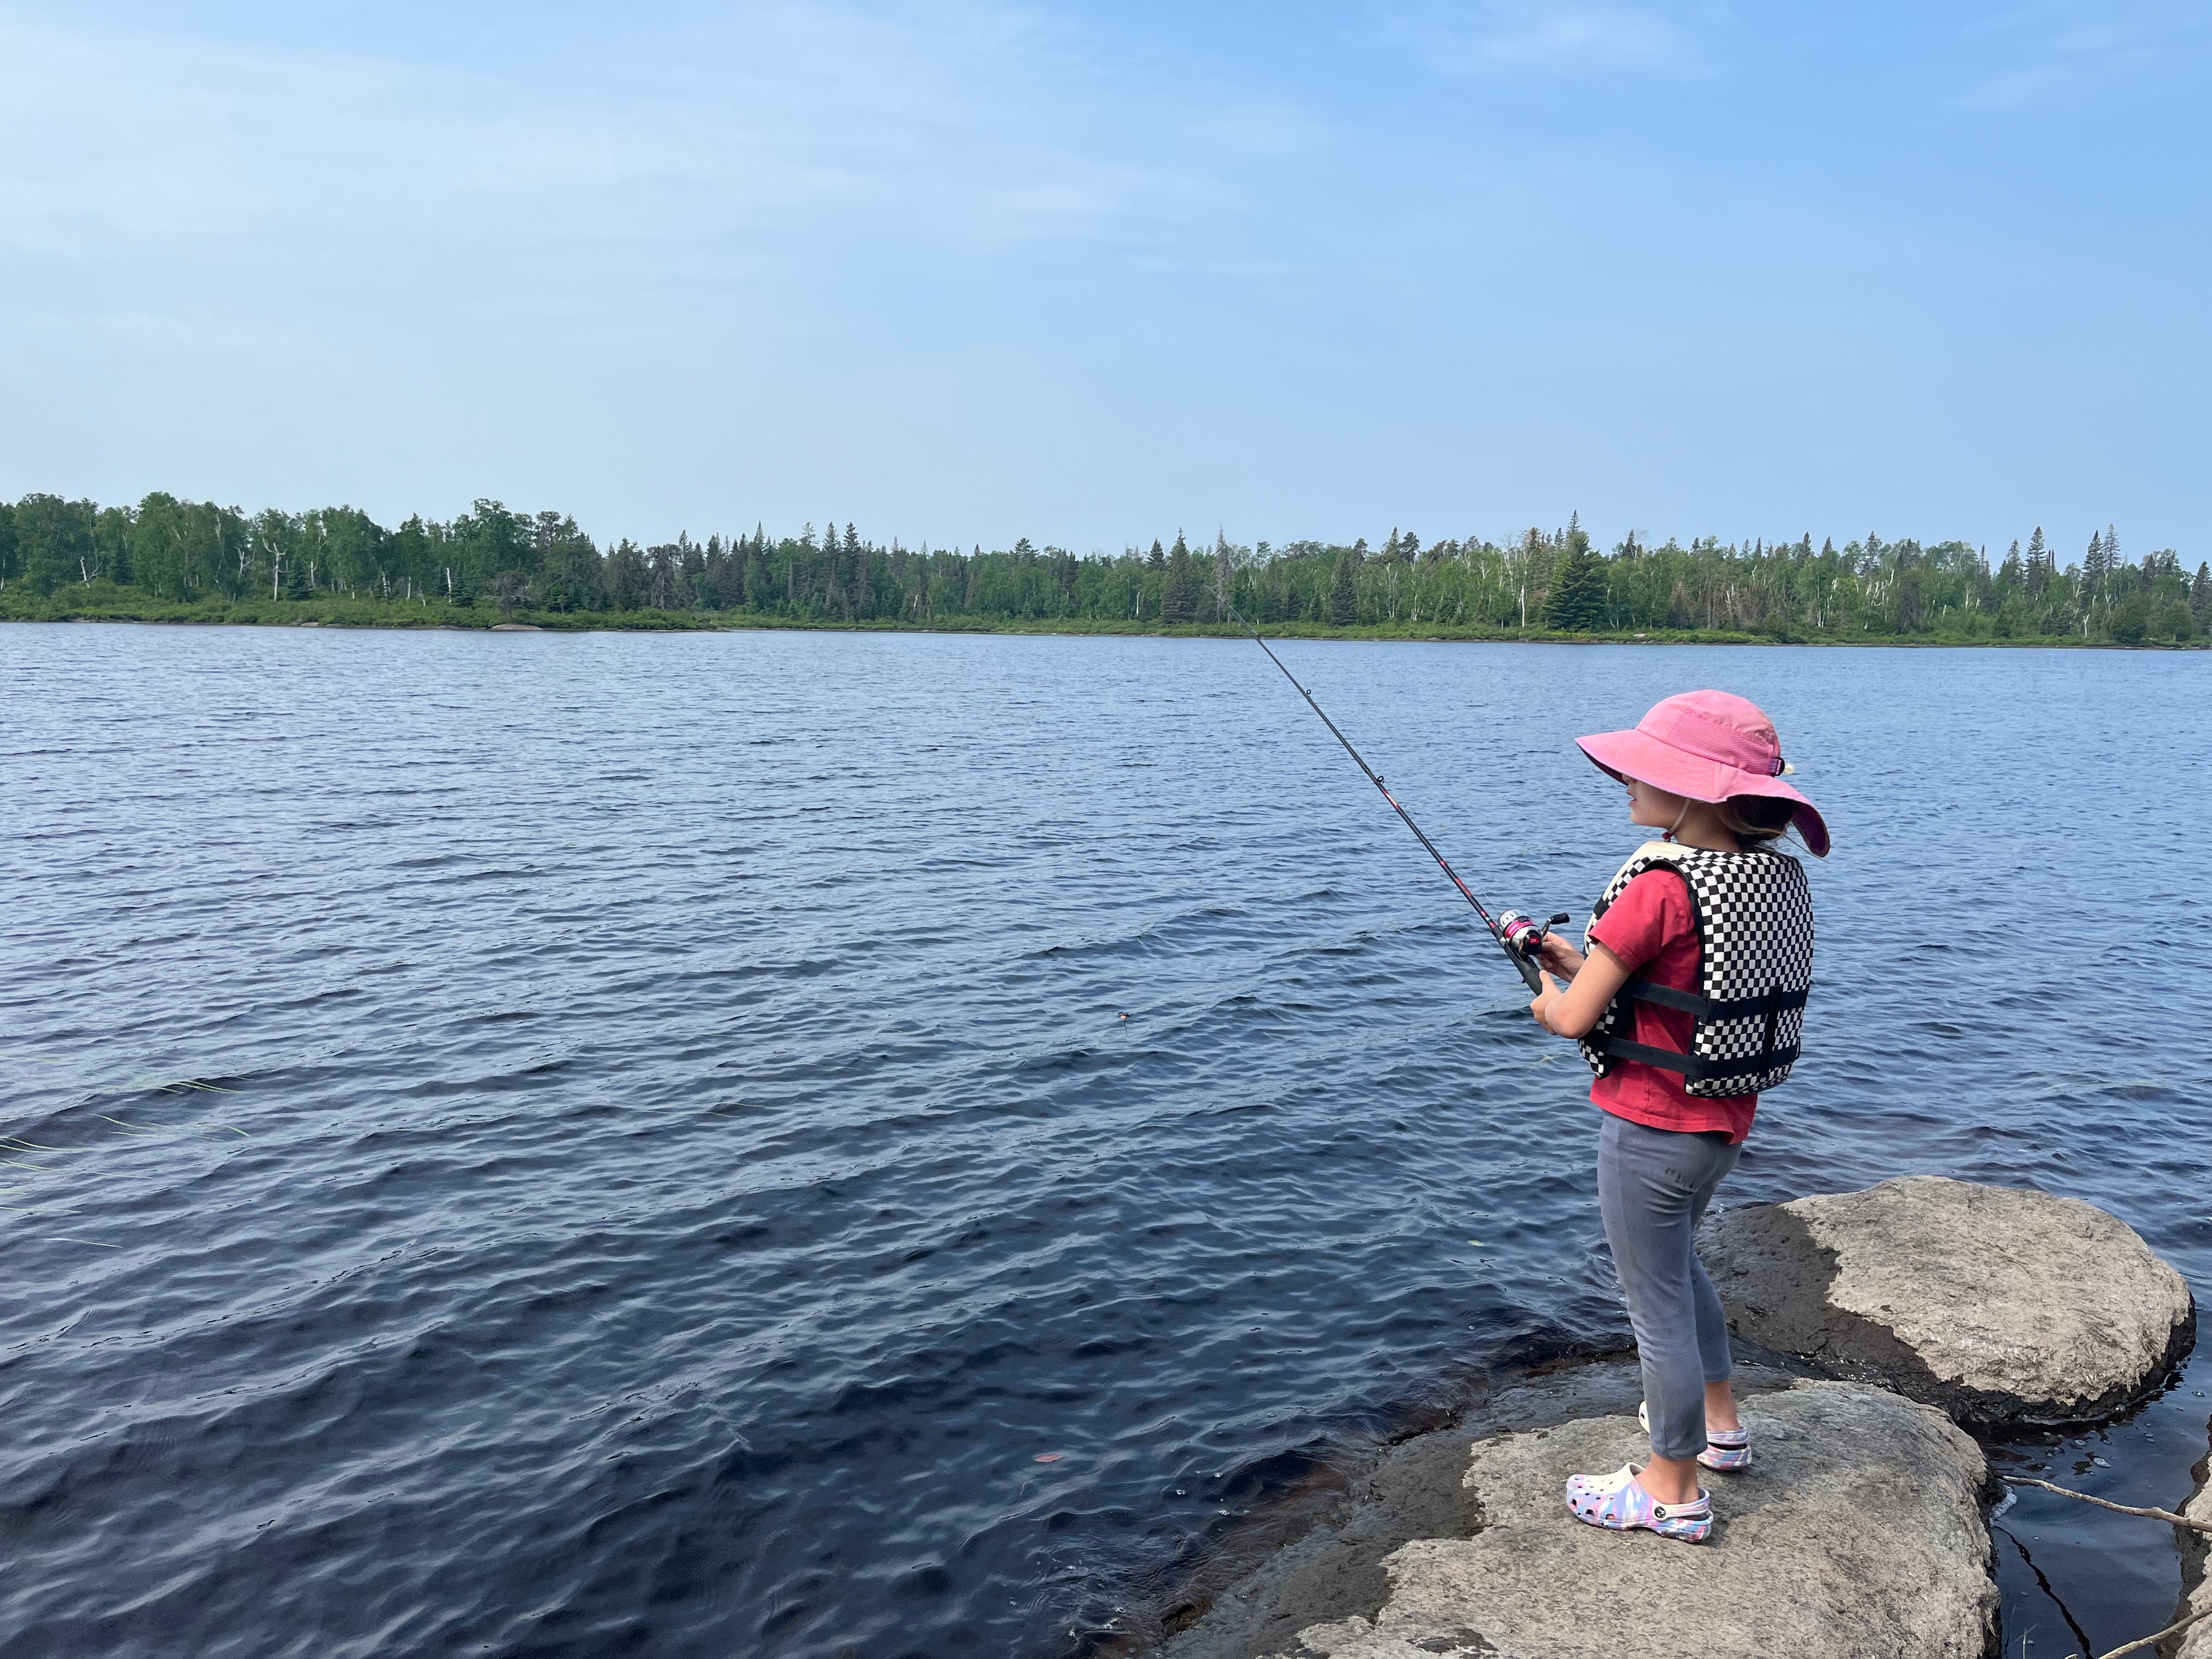 Kid fishing in Boundary Waters. Checkered life jacket. Fishing hat. 